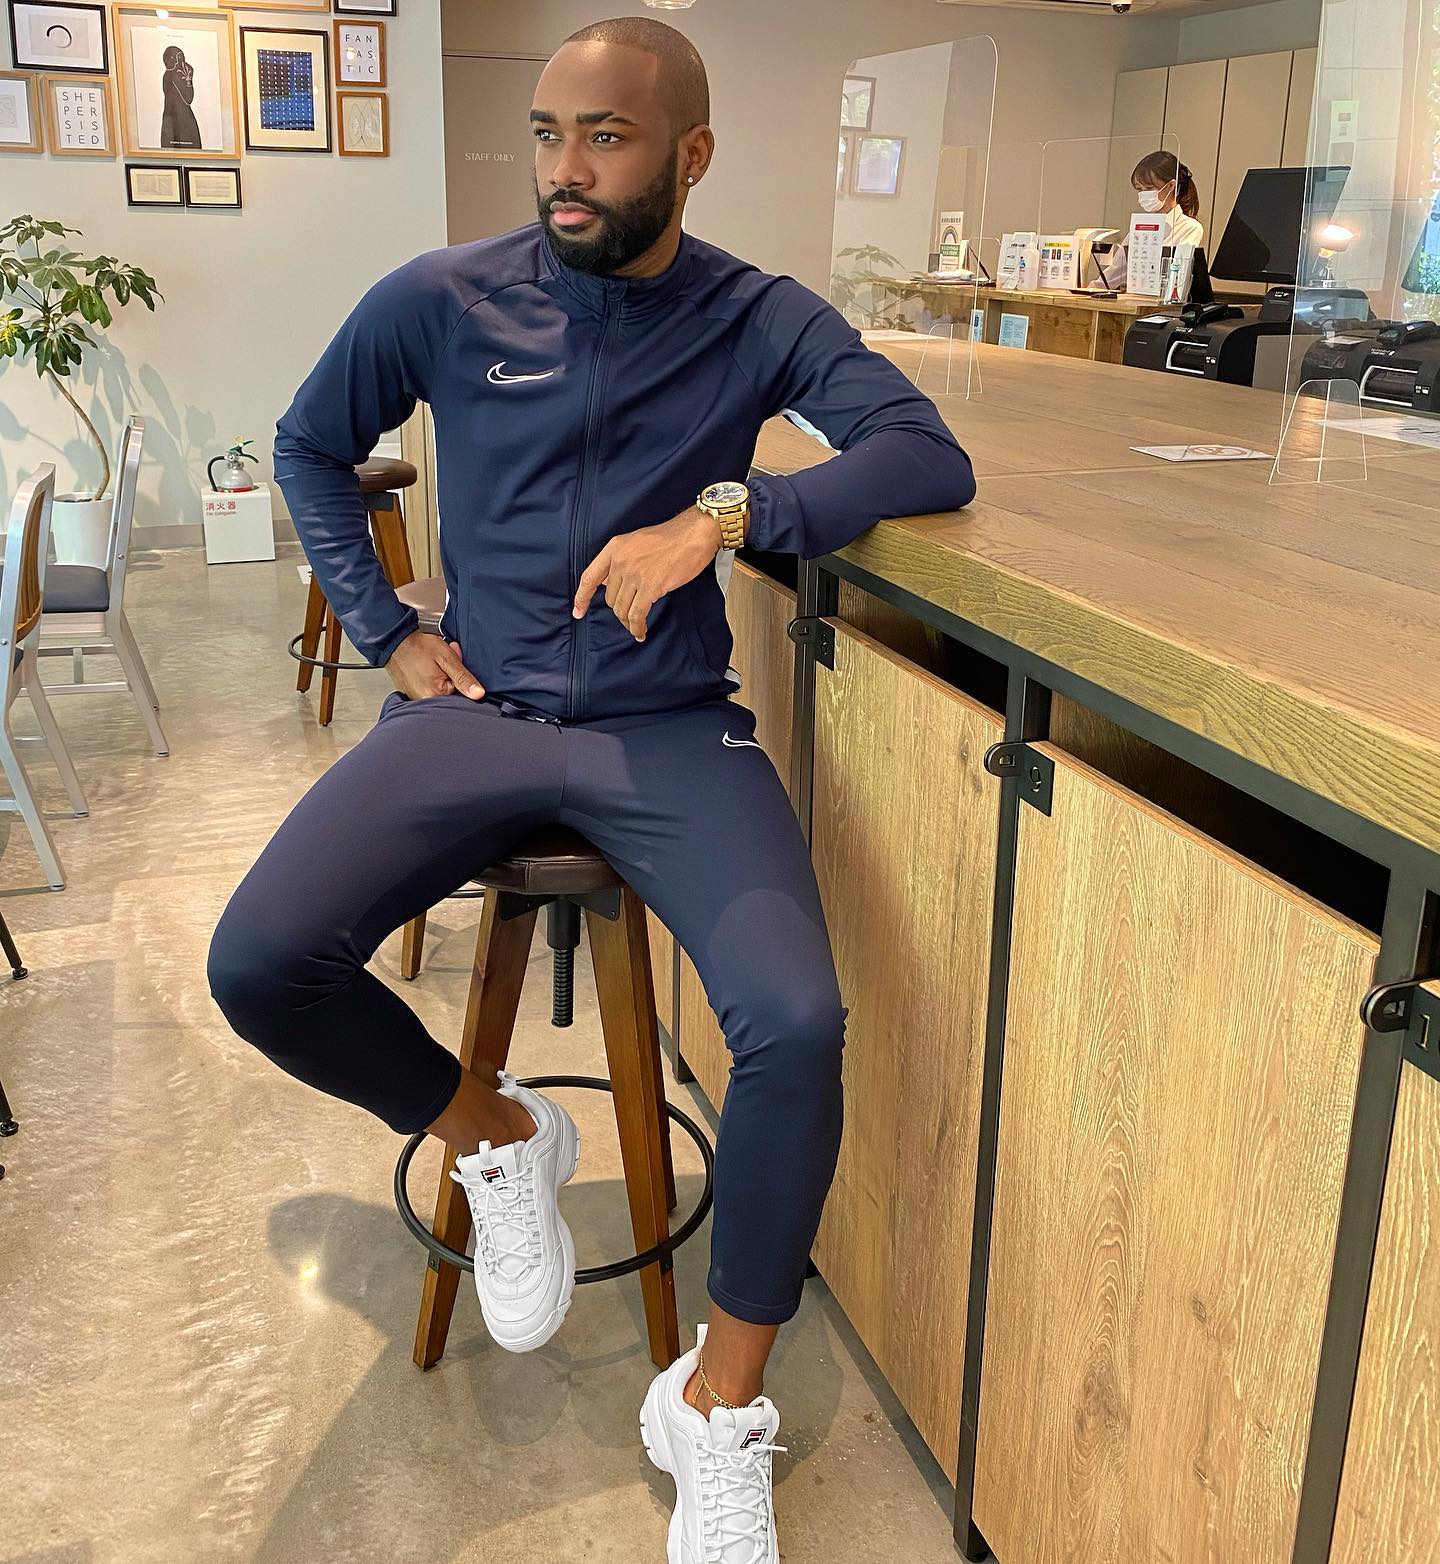 Lij Tafari Smith - Jamaican digital influencer in Japan...10 truths you should know about him